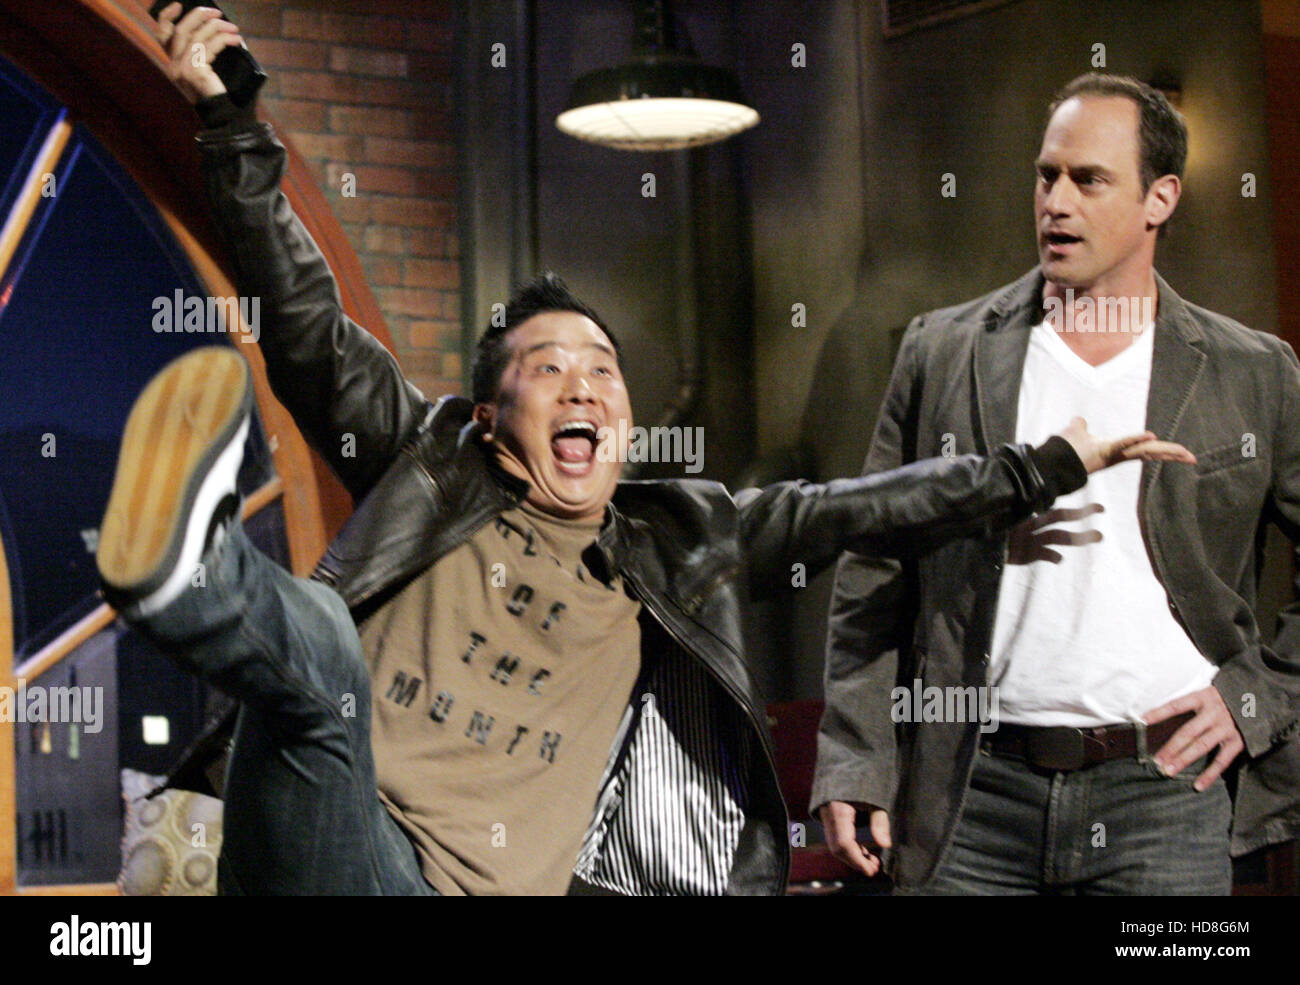 MAD TV, Bobby Lee, Christopher Meloni, (stagione 11, epis. #1106, in onda Novembre 19, 2005), 1995-09. photo: Kelsey McNeal / TM Foto Stock